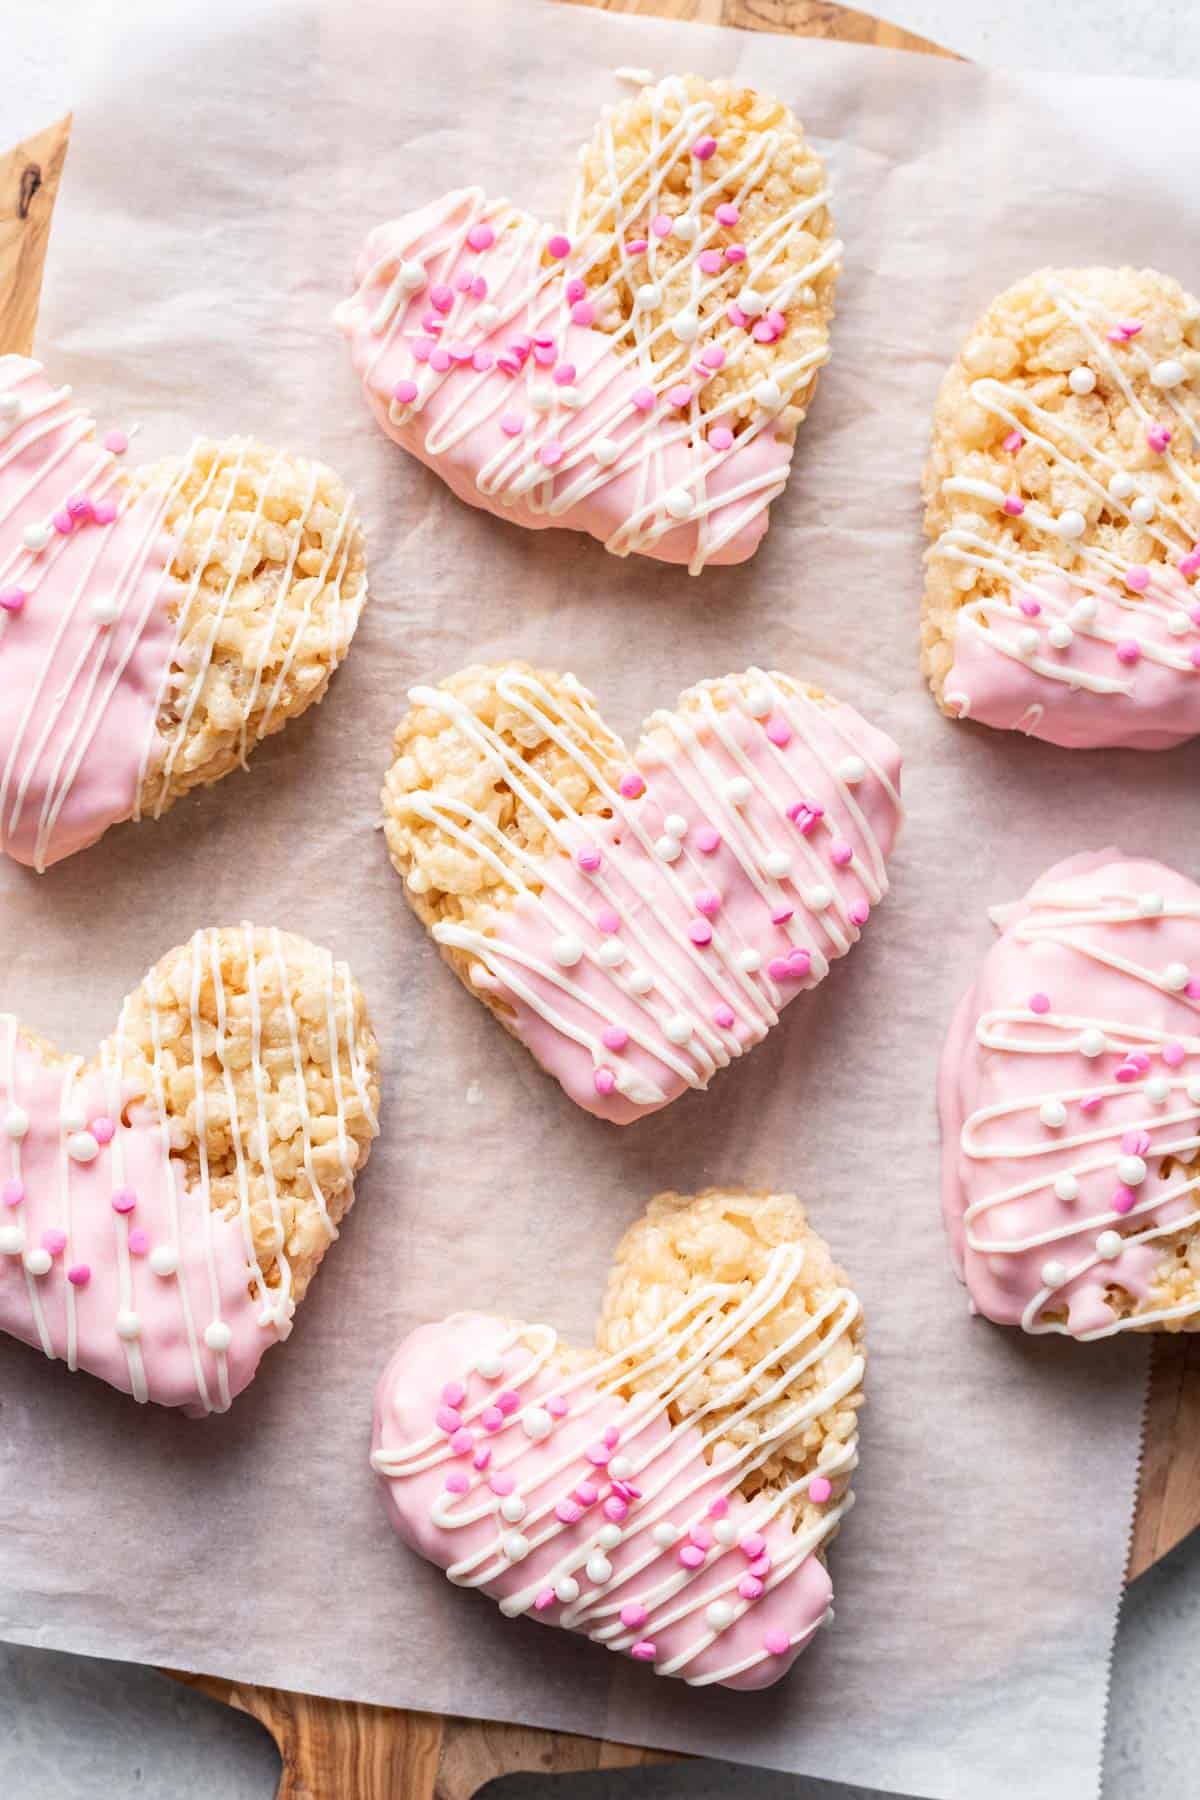 Heart shaped rice krispie treats decorated with white and pink sprinkles.